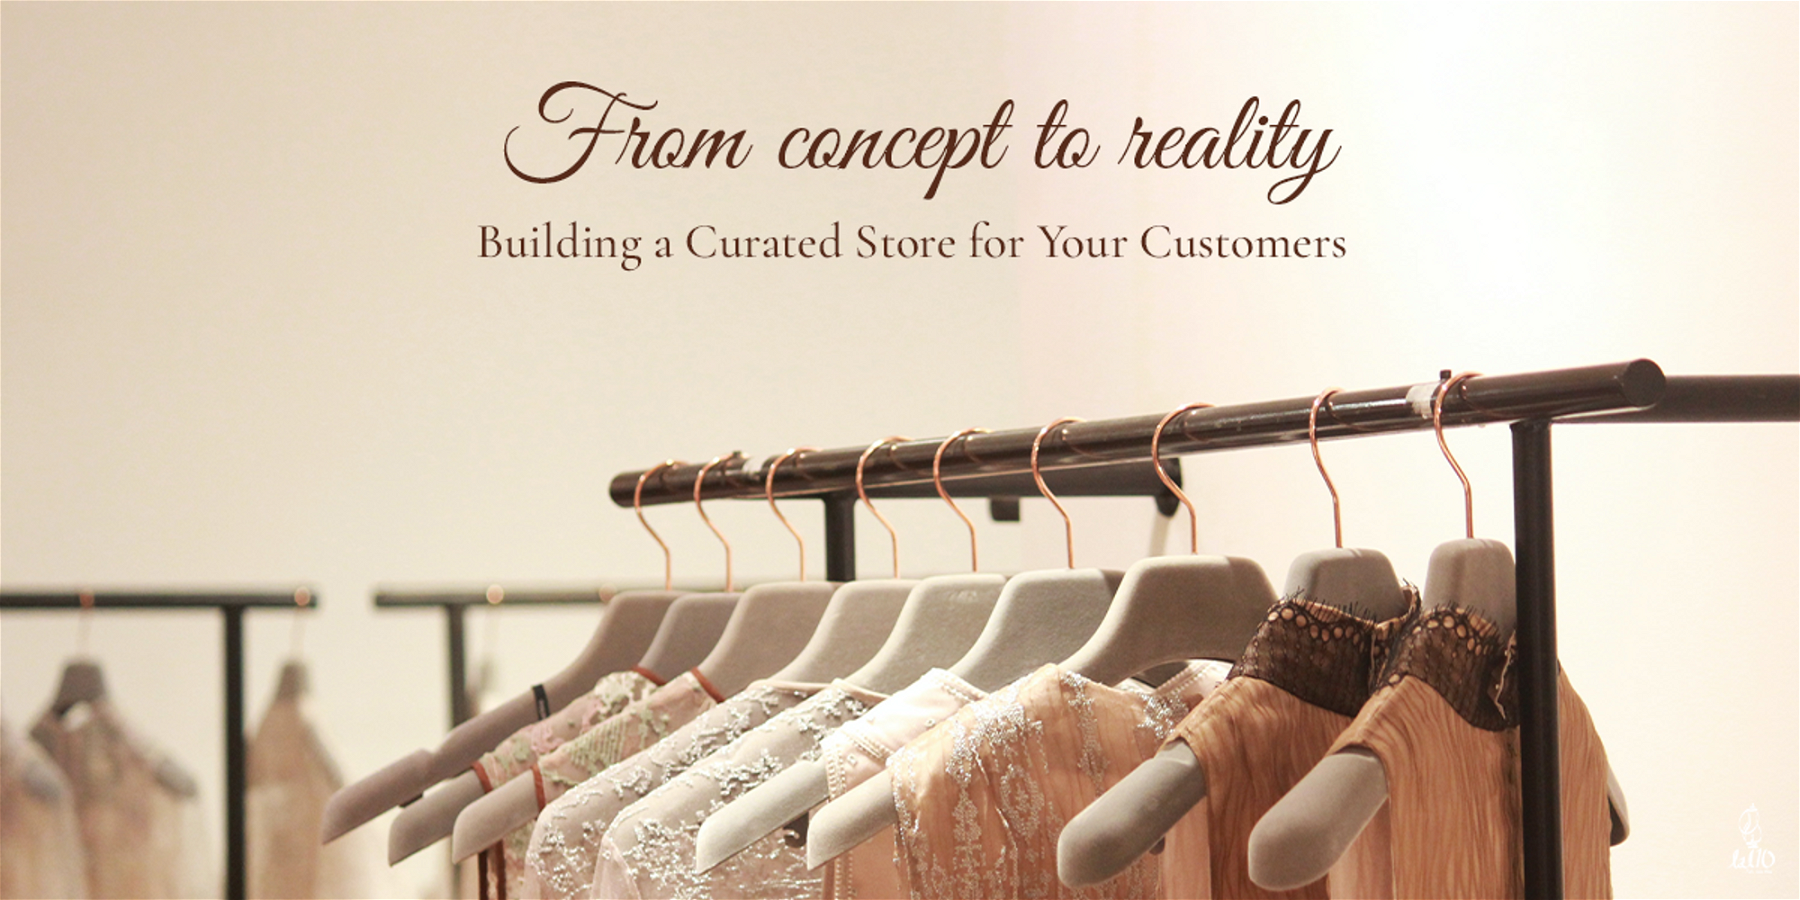 Gham cancept to reality

Building a Curated Store for Your Customers